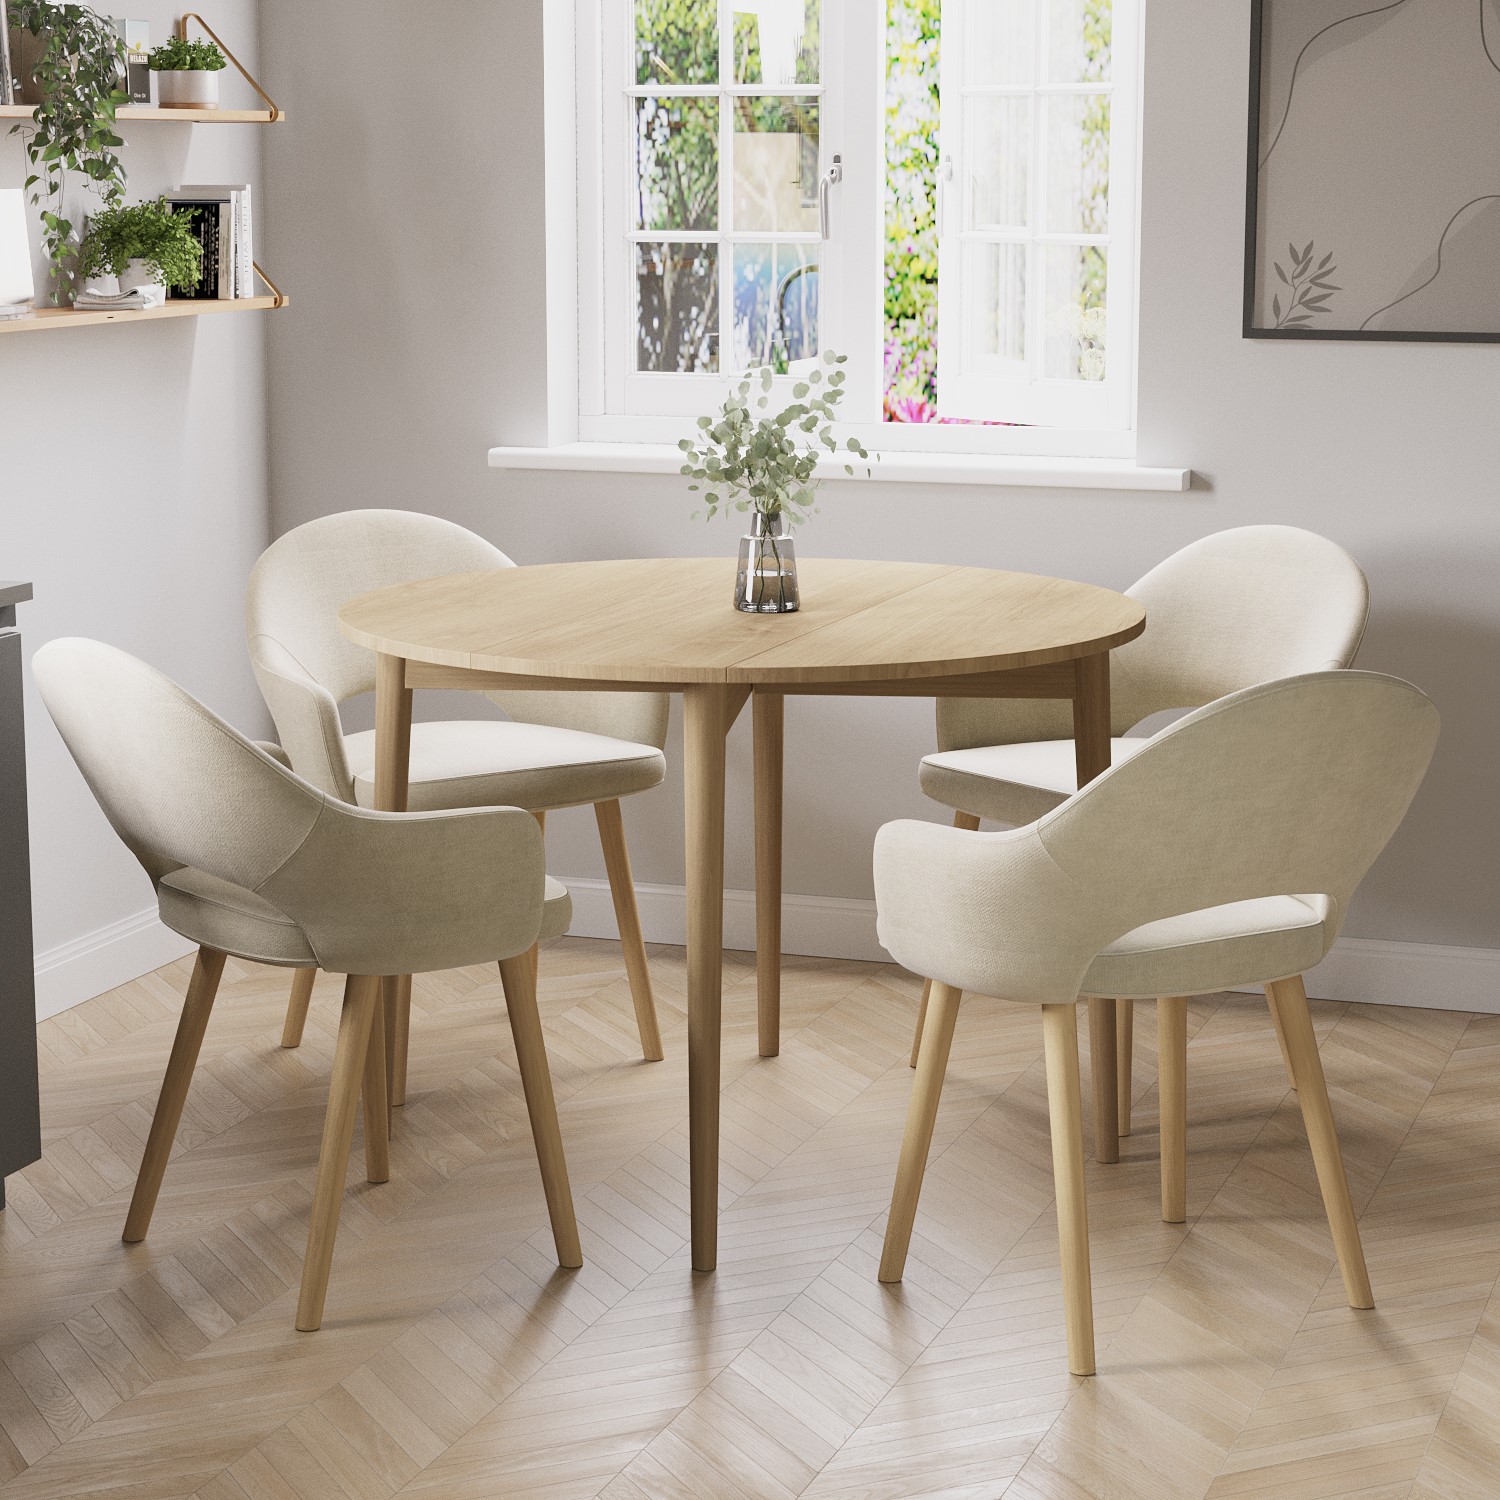 Photo of Round oak drop leaf dining table with 4 beige fabric dining chairs - rudy